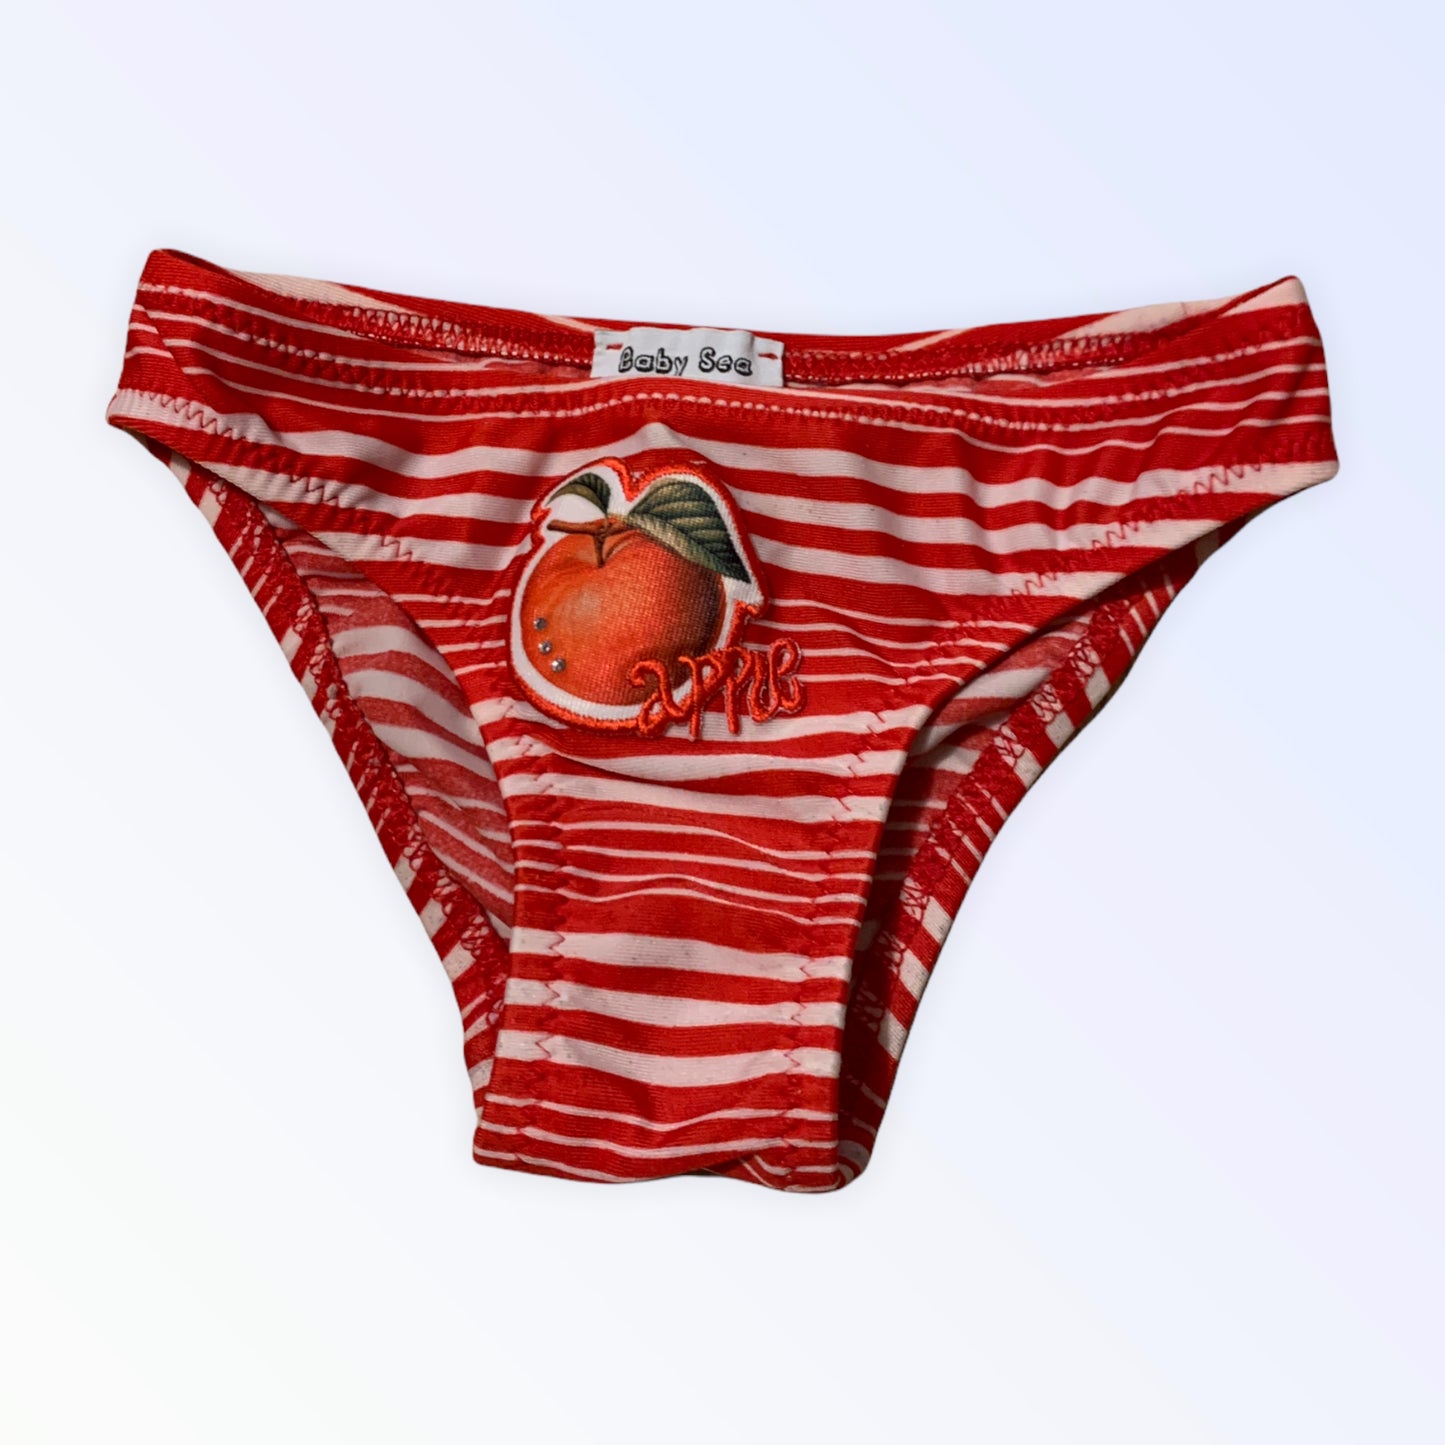 Calzedonia swimsuit for girls 9-12 months